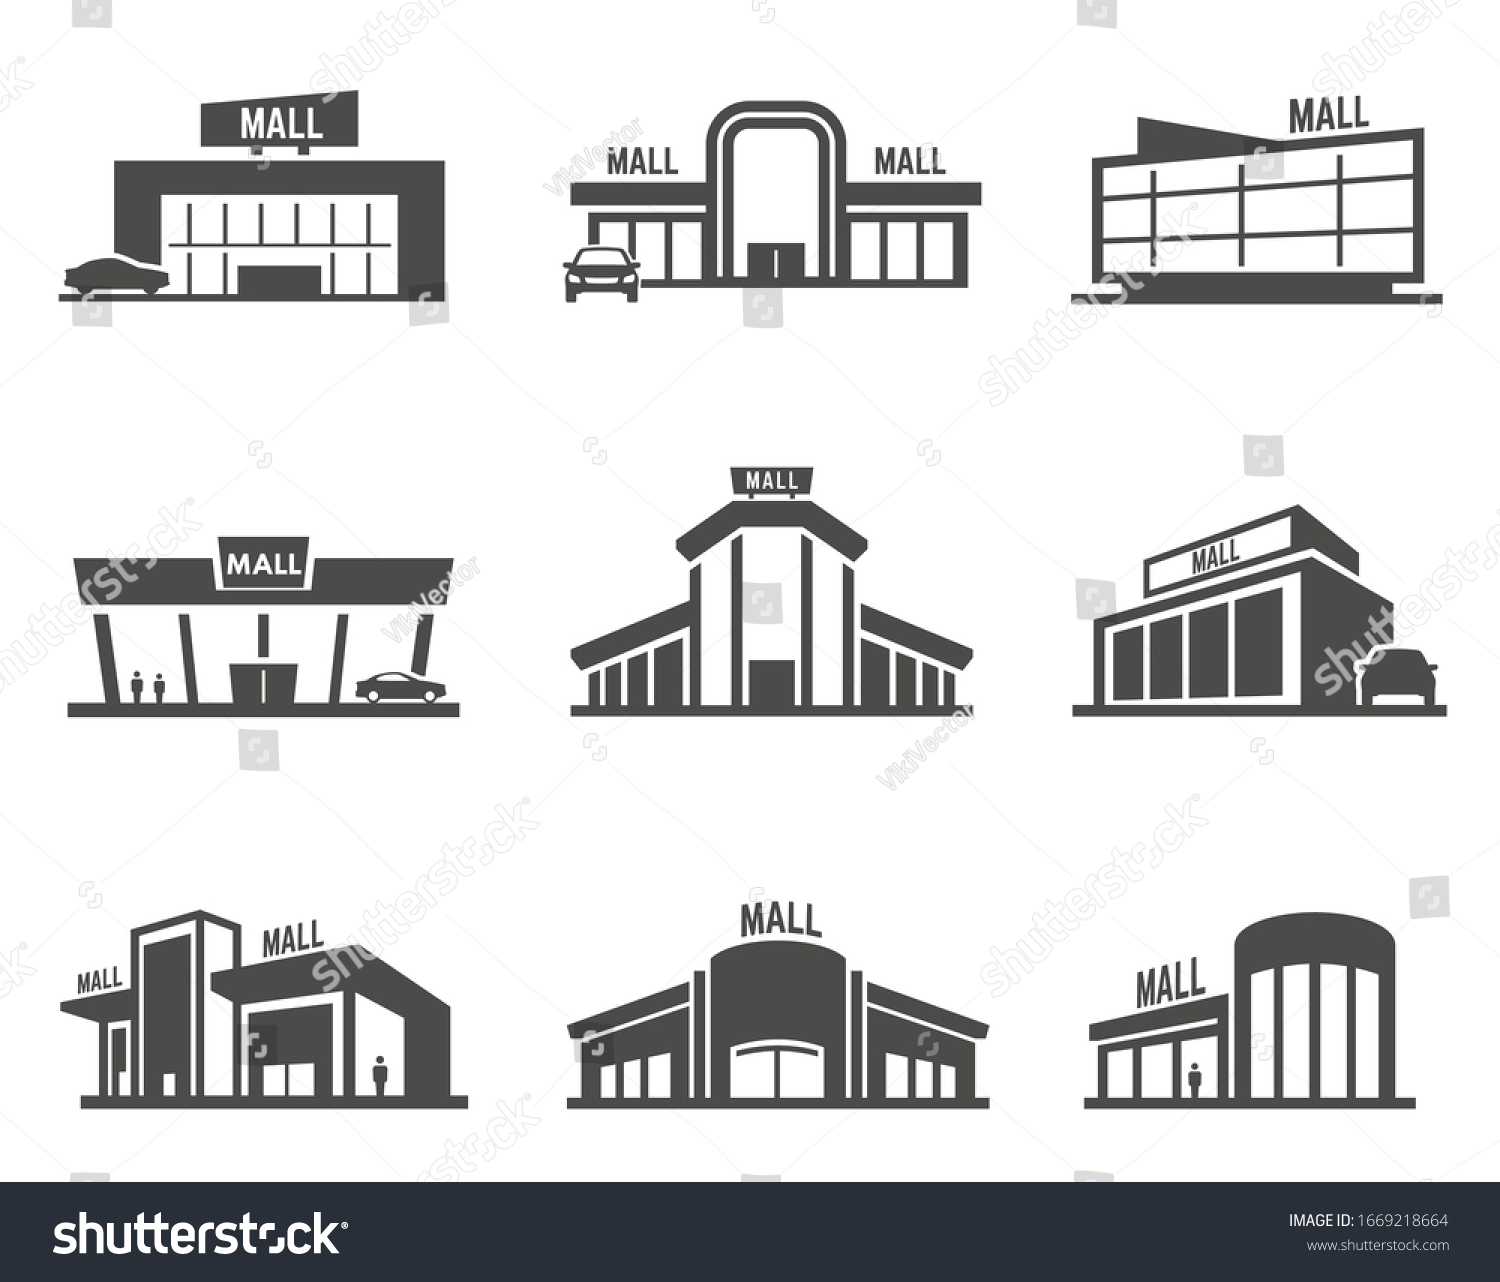 Shopping mall or center icon or symbol set. Collection of facades of modern stores. Bundle of black silhouettes of supermarket buildings. Flat monochrome vector illustration for logo, sign or emblem. #1669218664